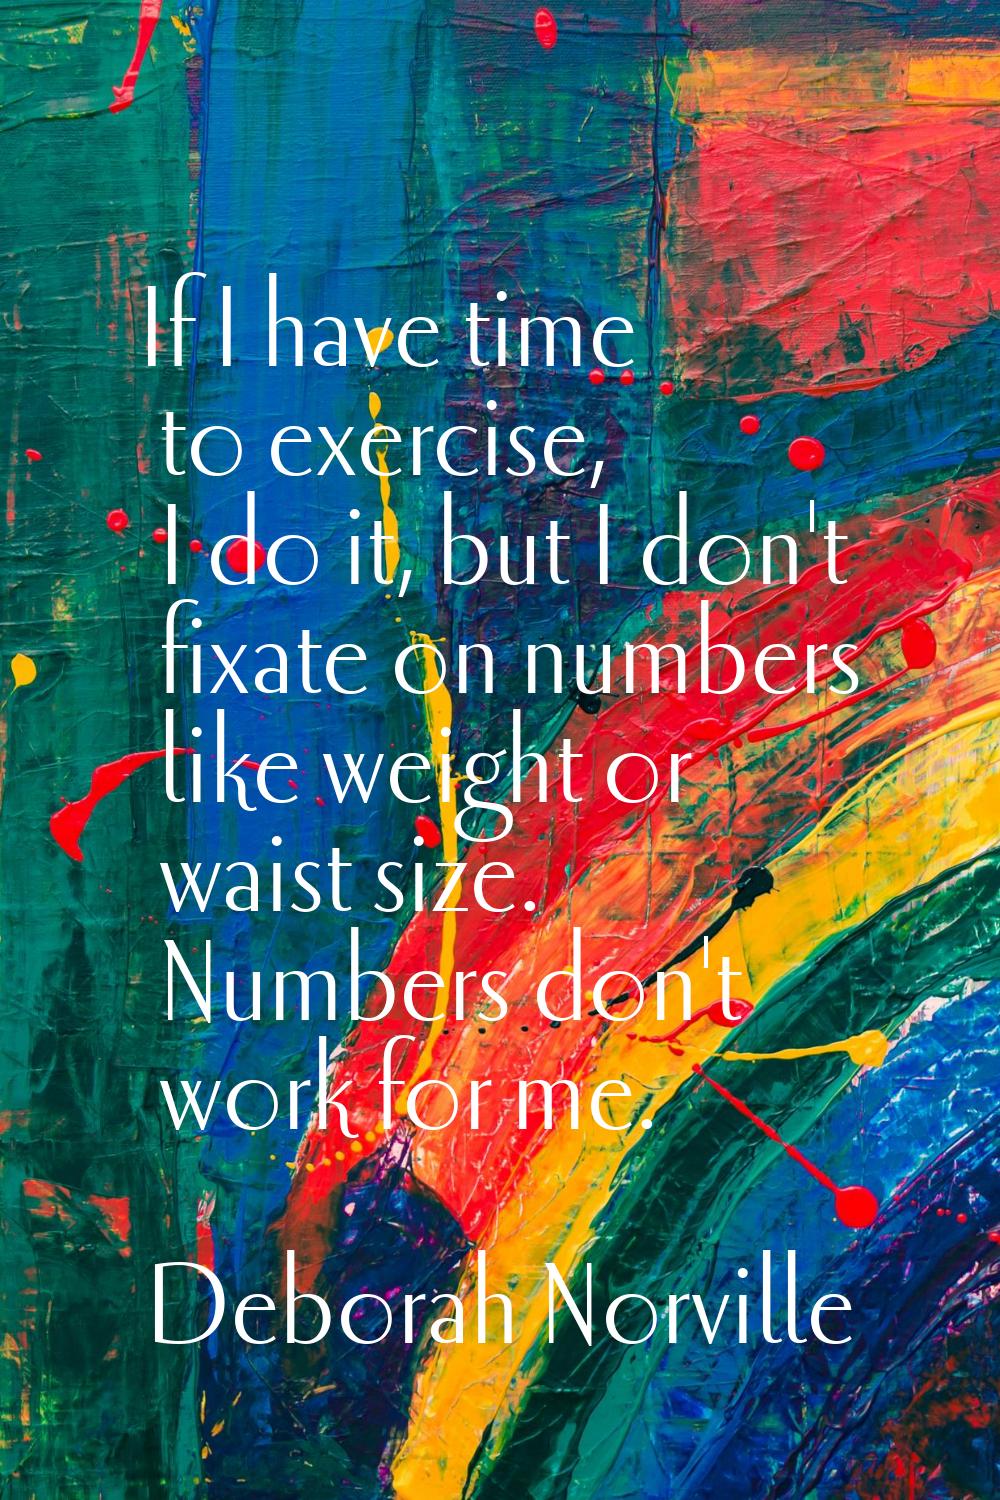 If I have time to exercise, I do it, but I don't fixate on numbers like weight or waist size. Numbe